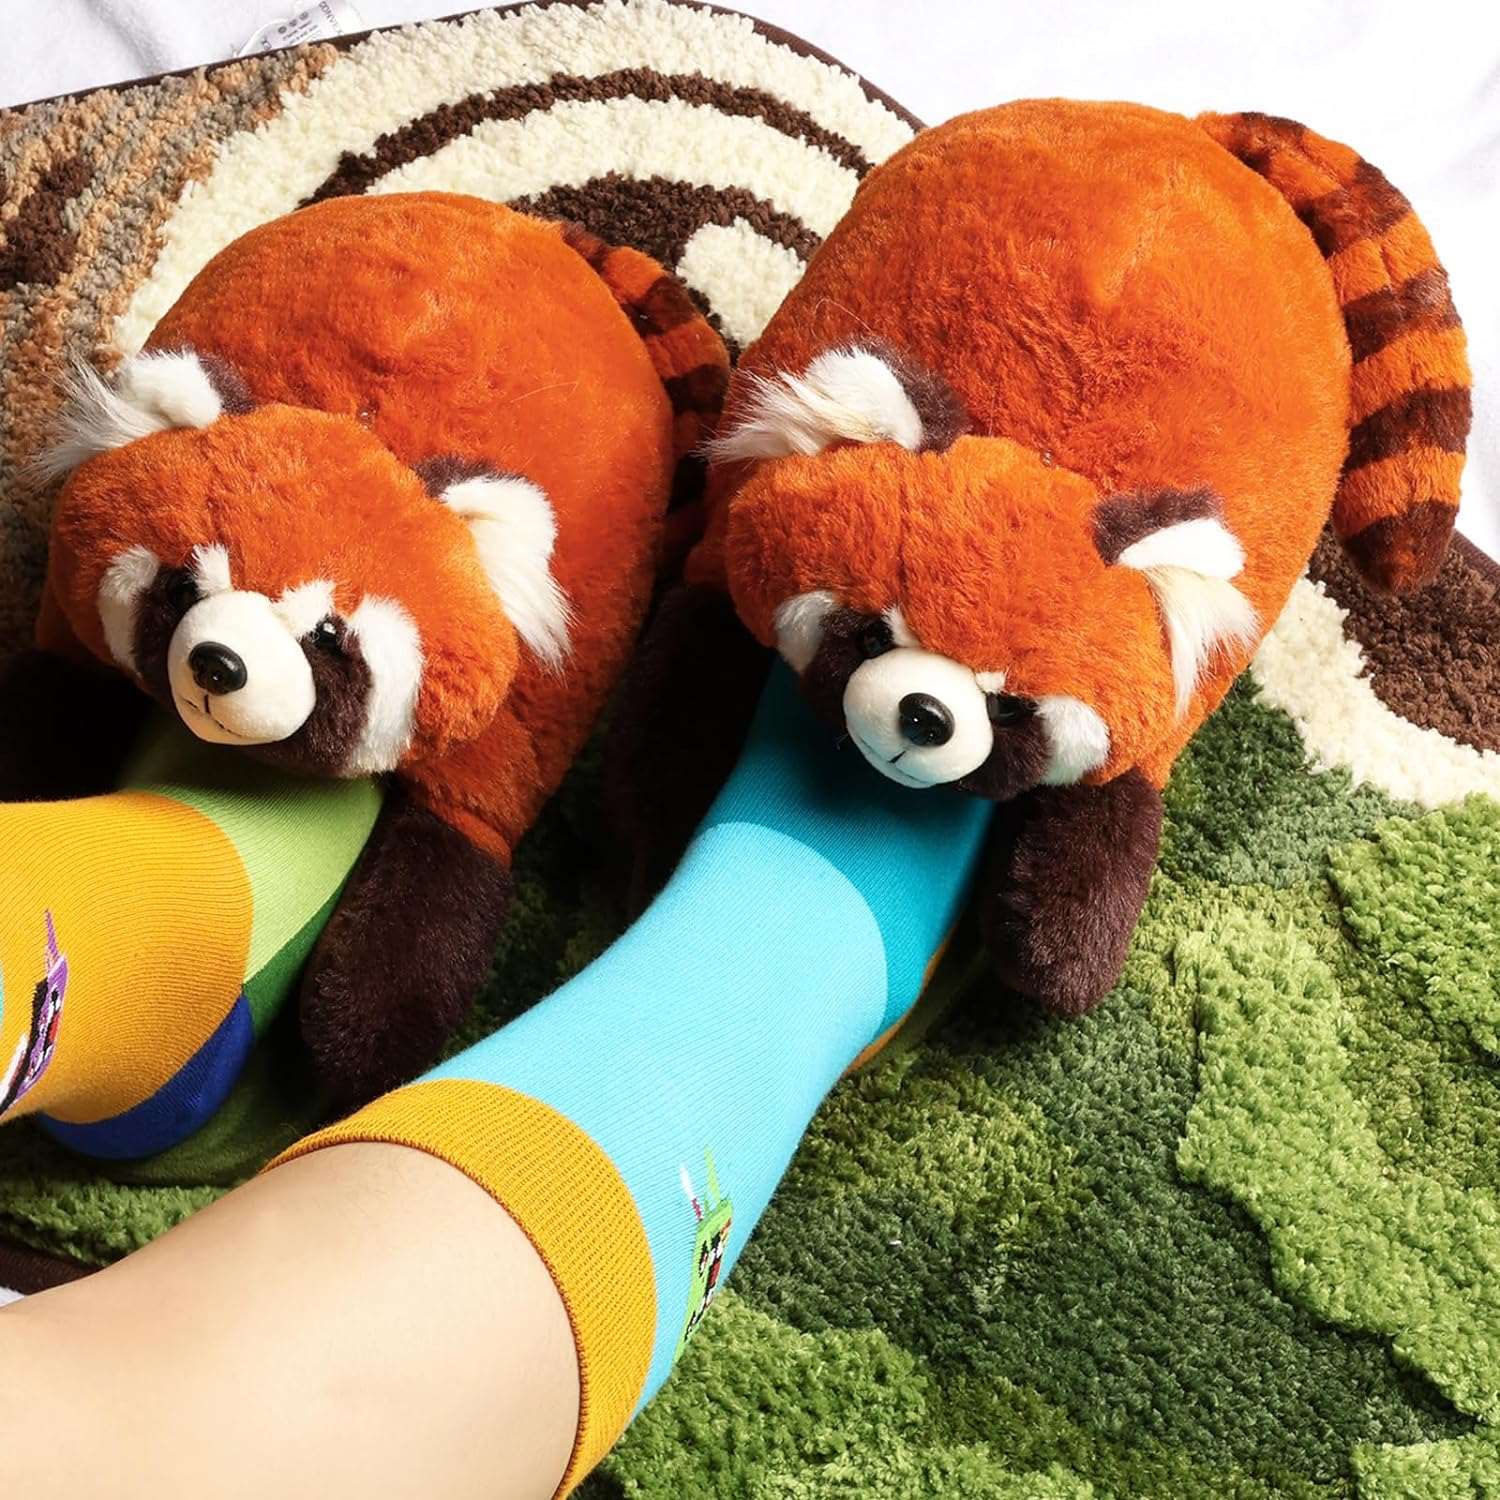 Cute red panda slippers on your feet